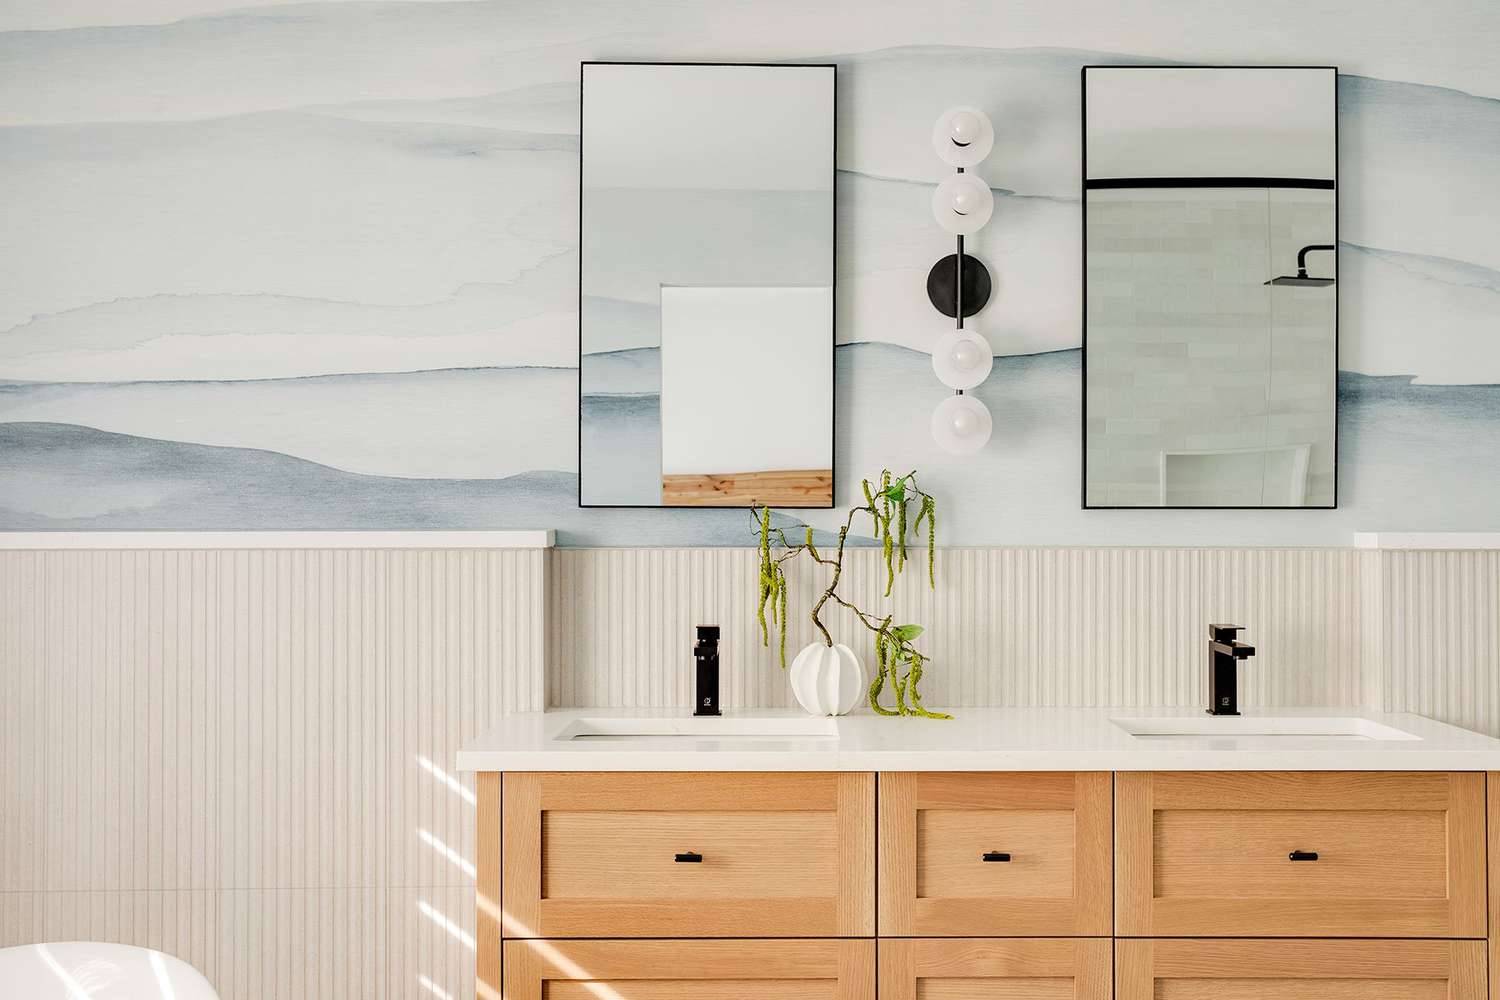 Small bathroom bathroom accent wall can be a great way to add personality, style, and visual interest to your space.